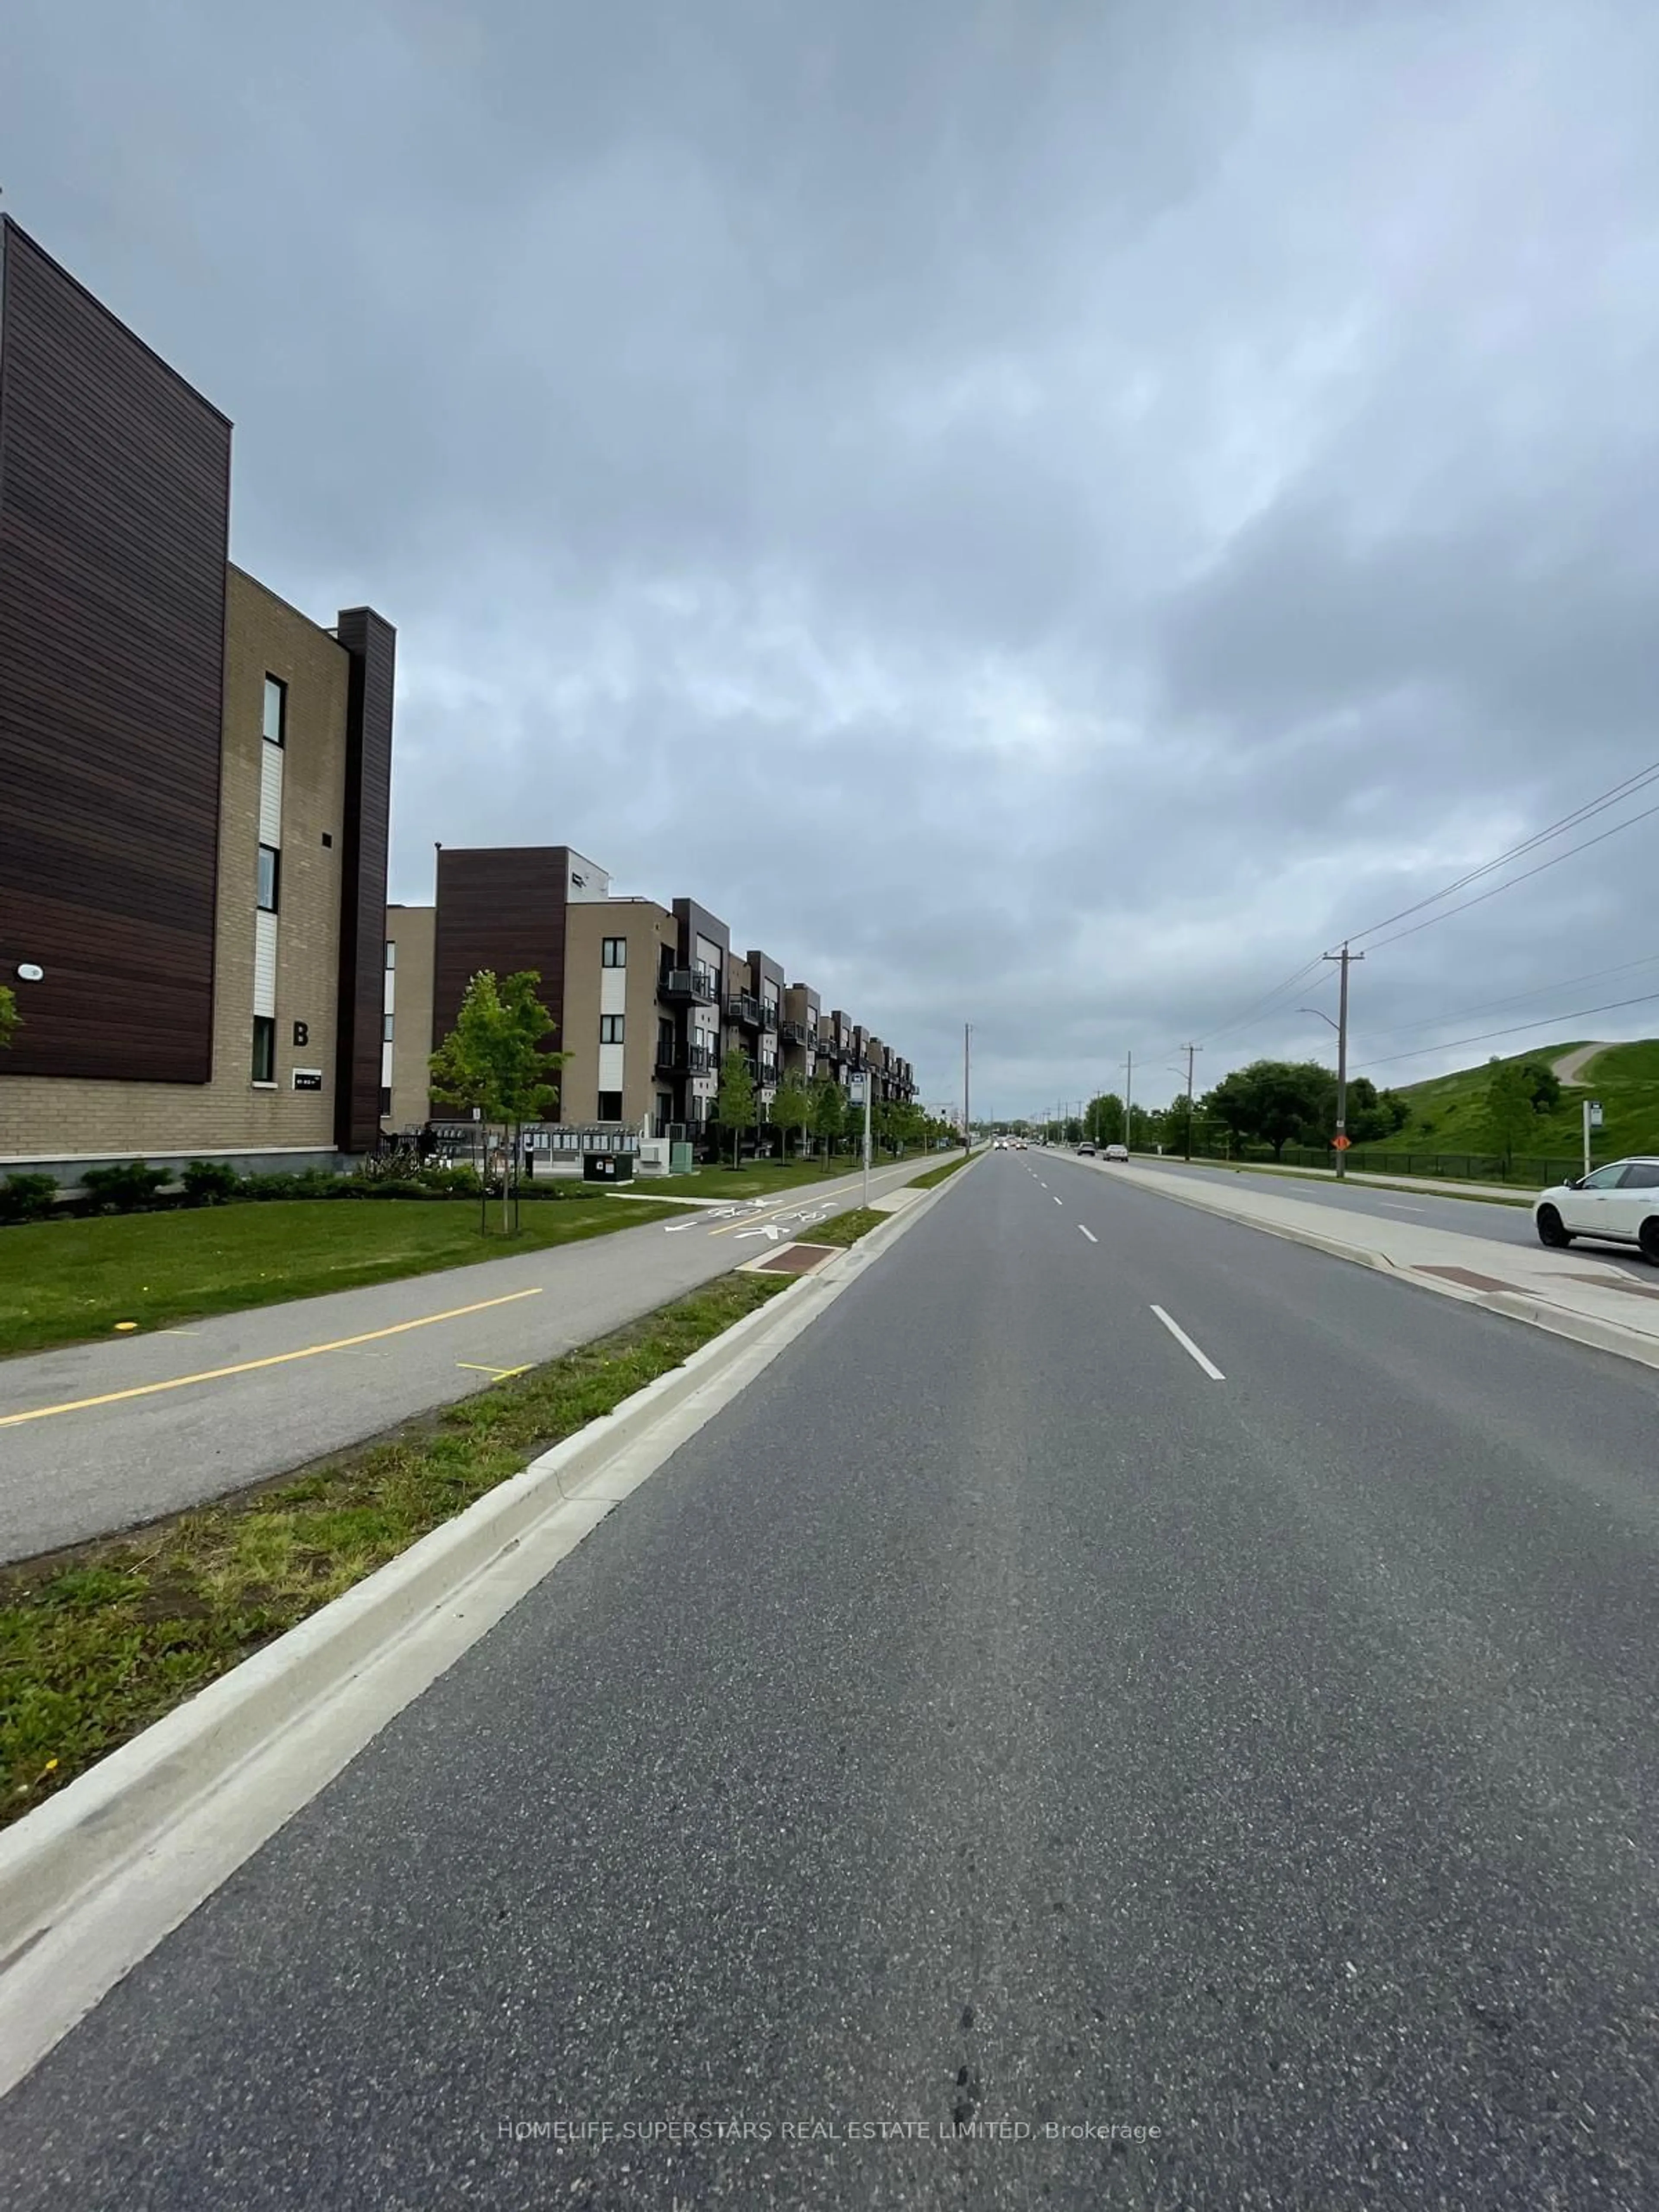 Street view for 10 Palace St #D9, Kitchener Ontario N2E 0J3